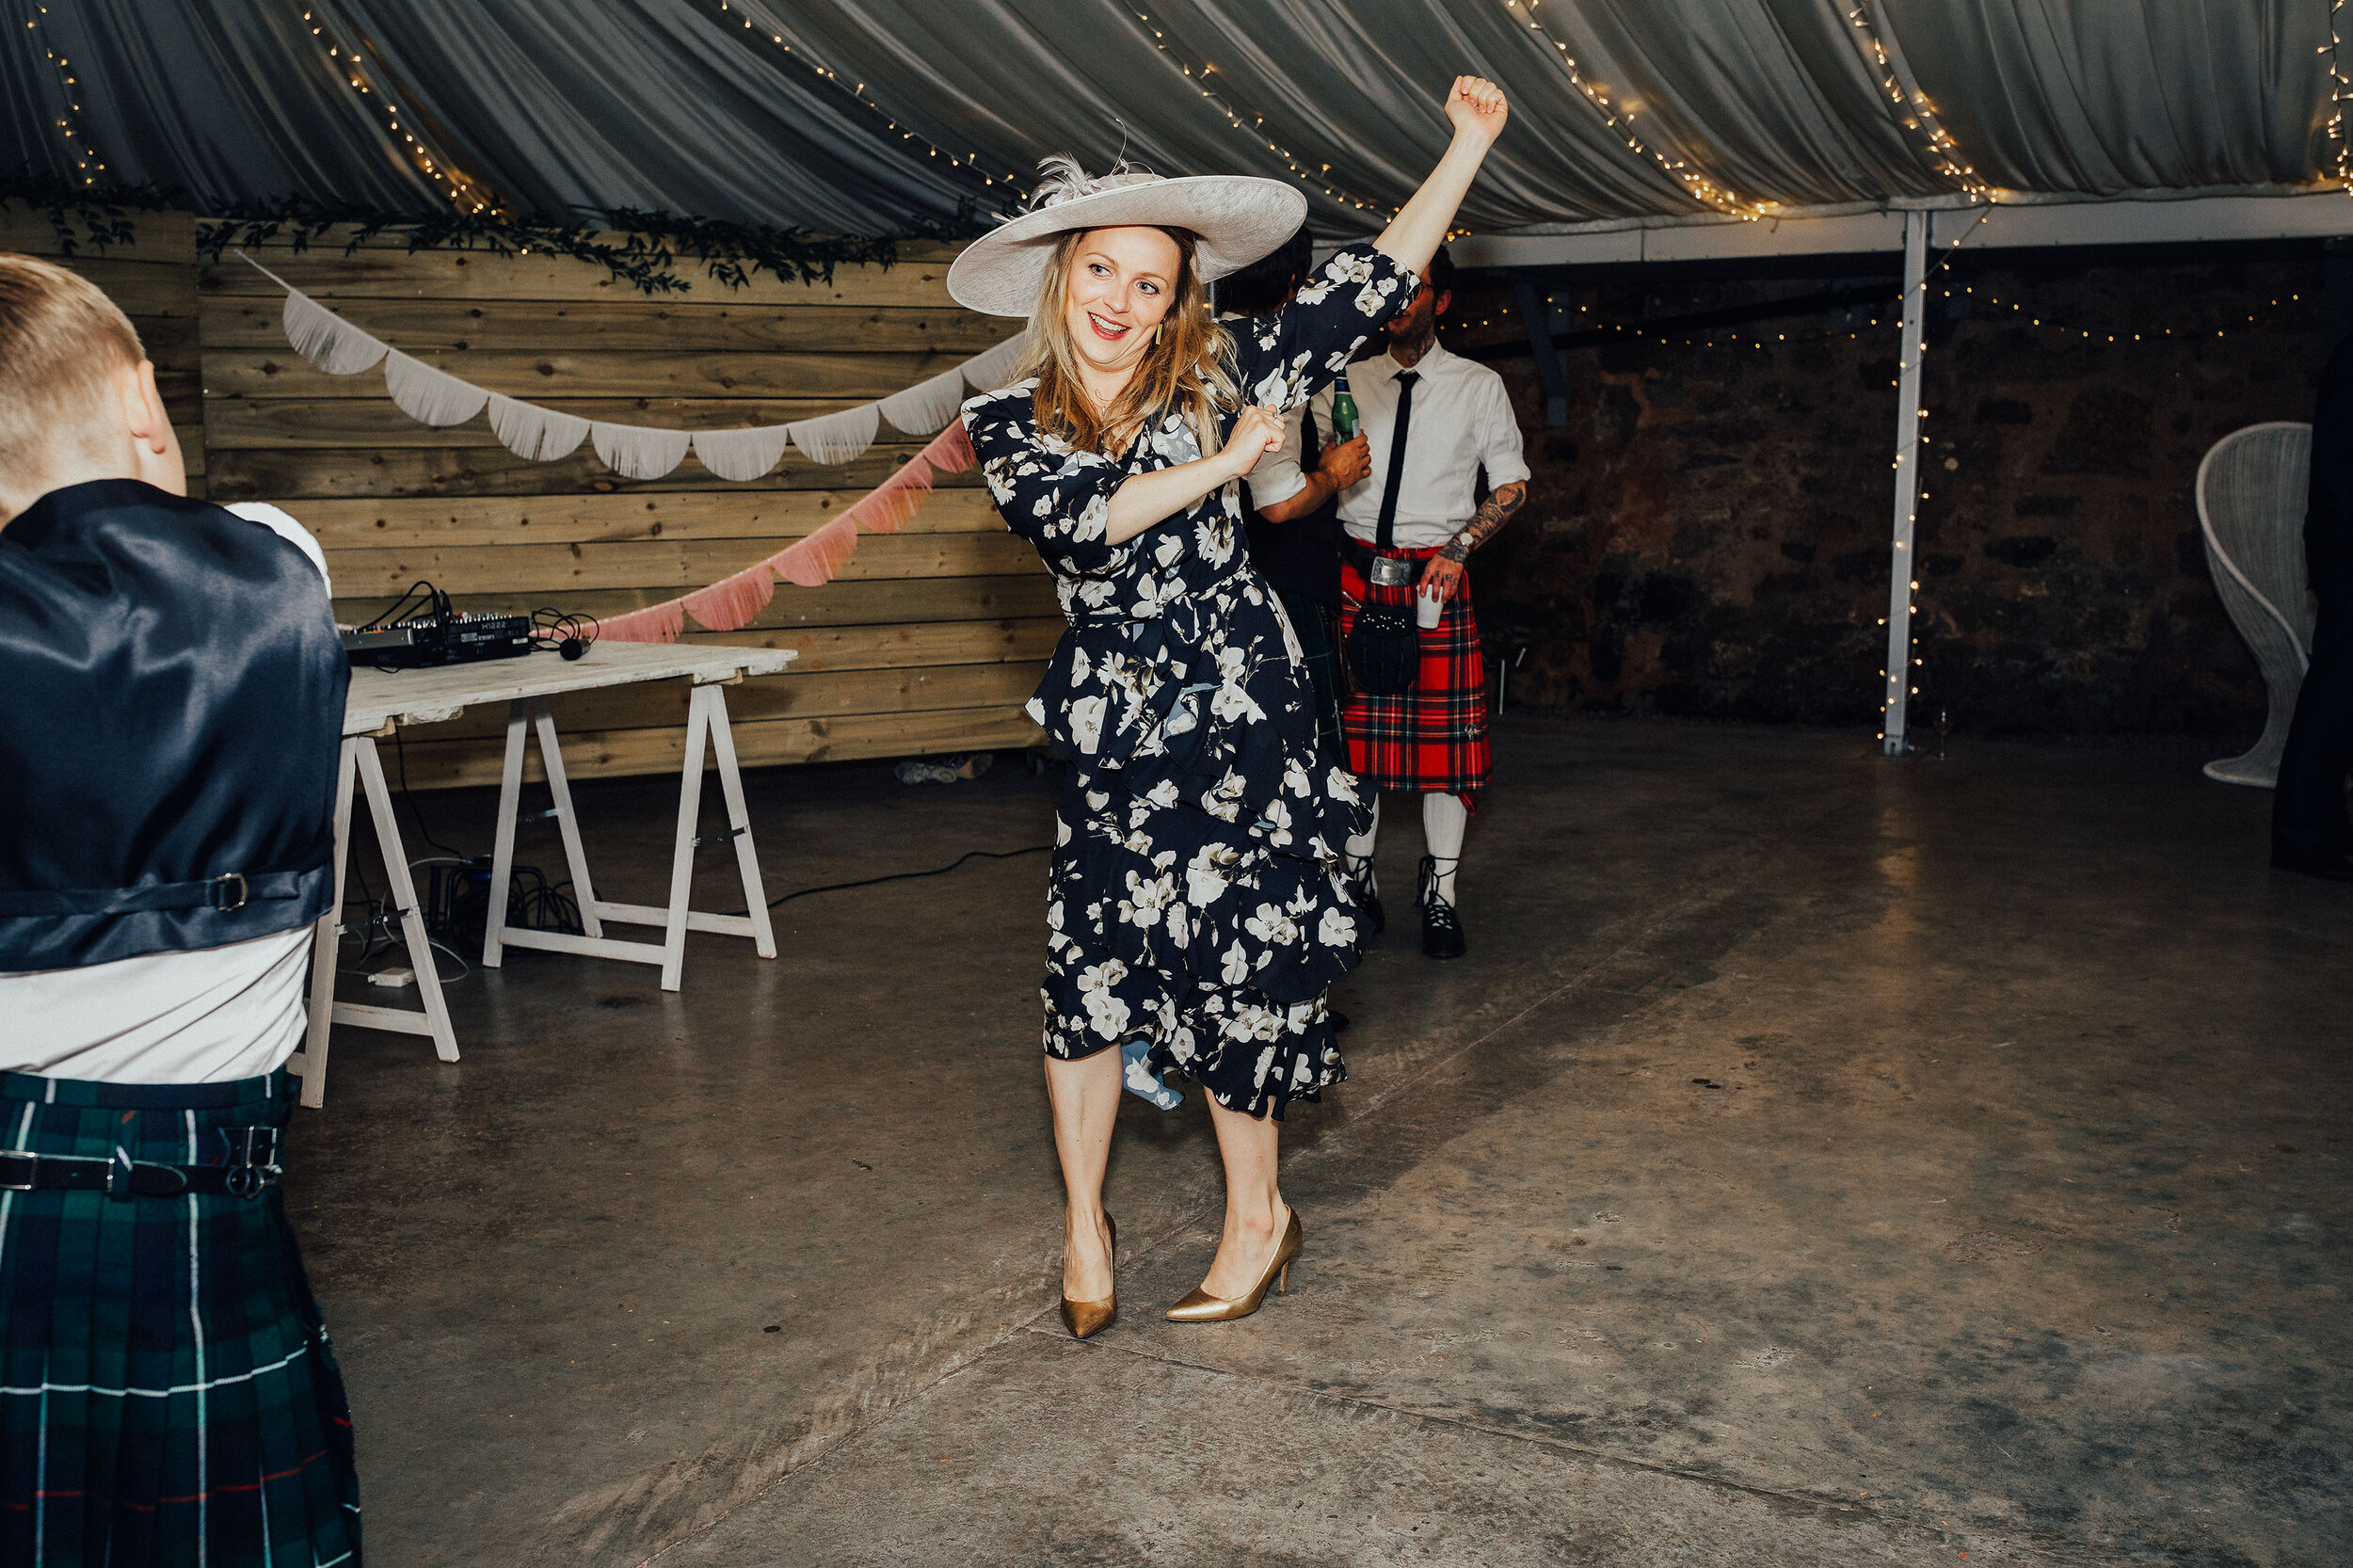 COW_SHED_CRAIL_WEDDING_PJ_PHILLIPS_PHOTOGRAPHY_170.jpg